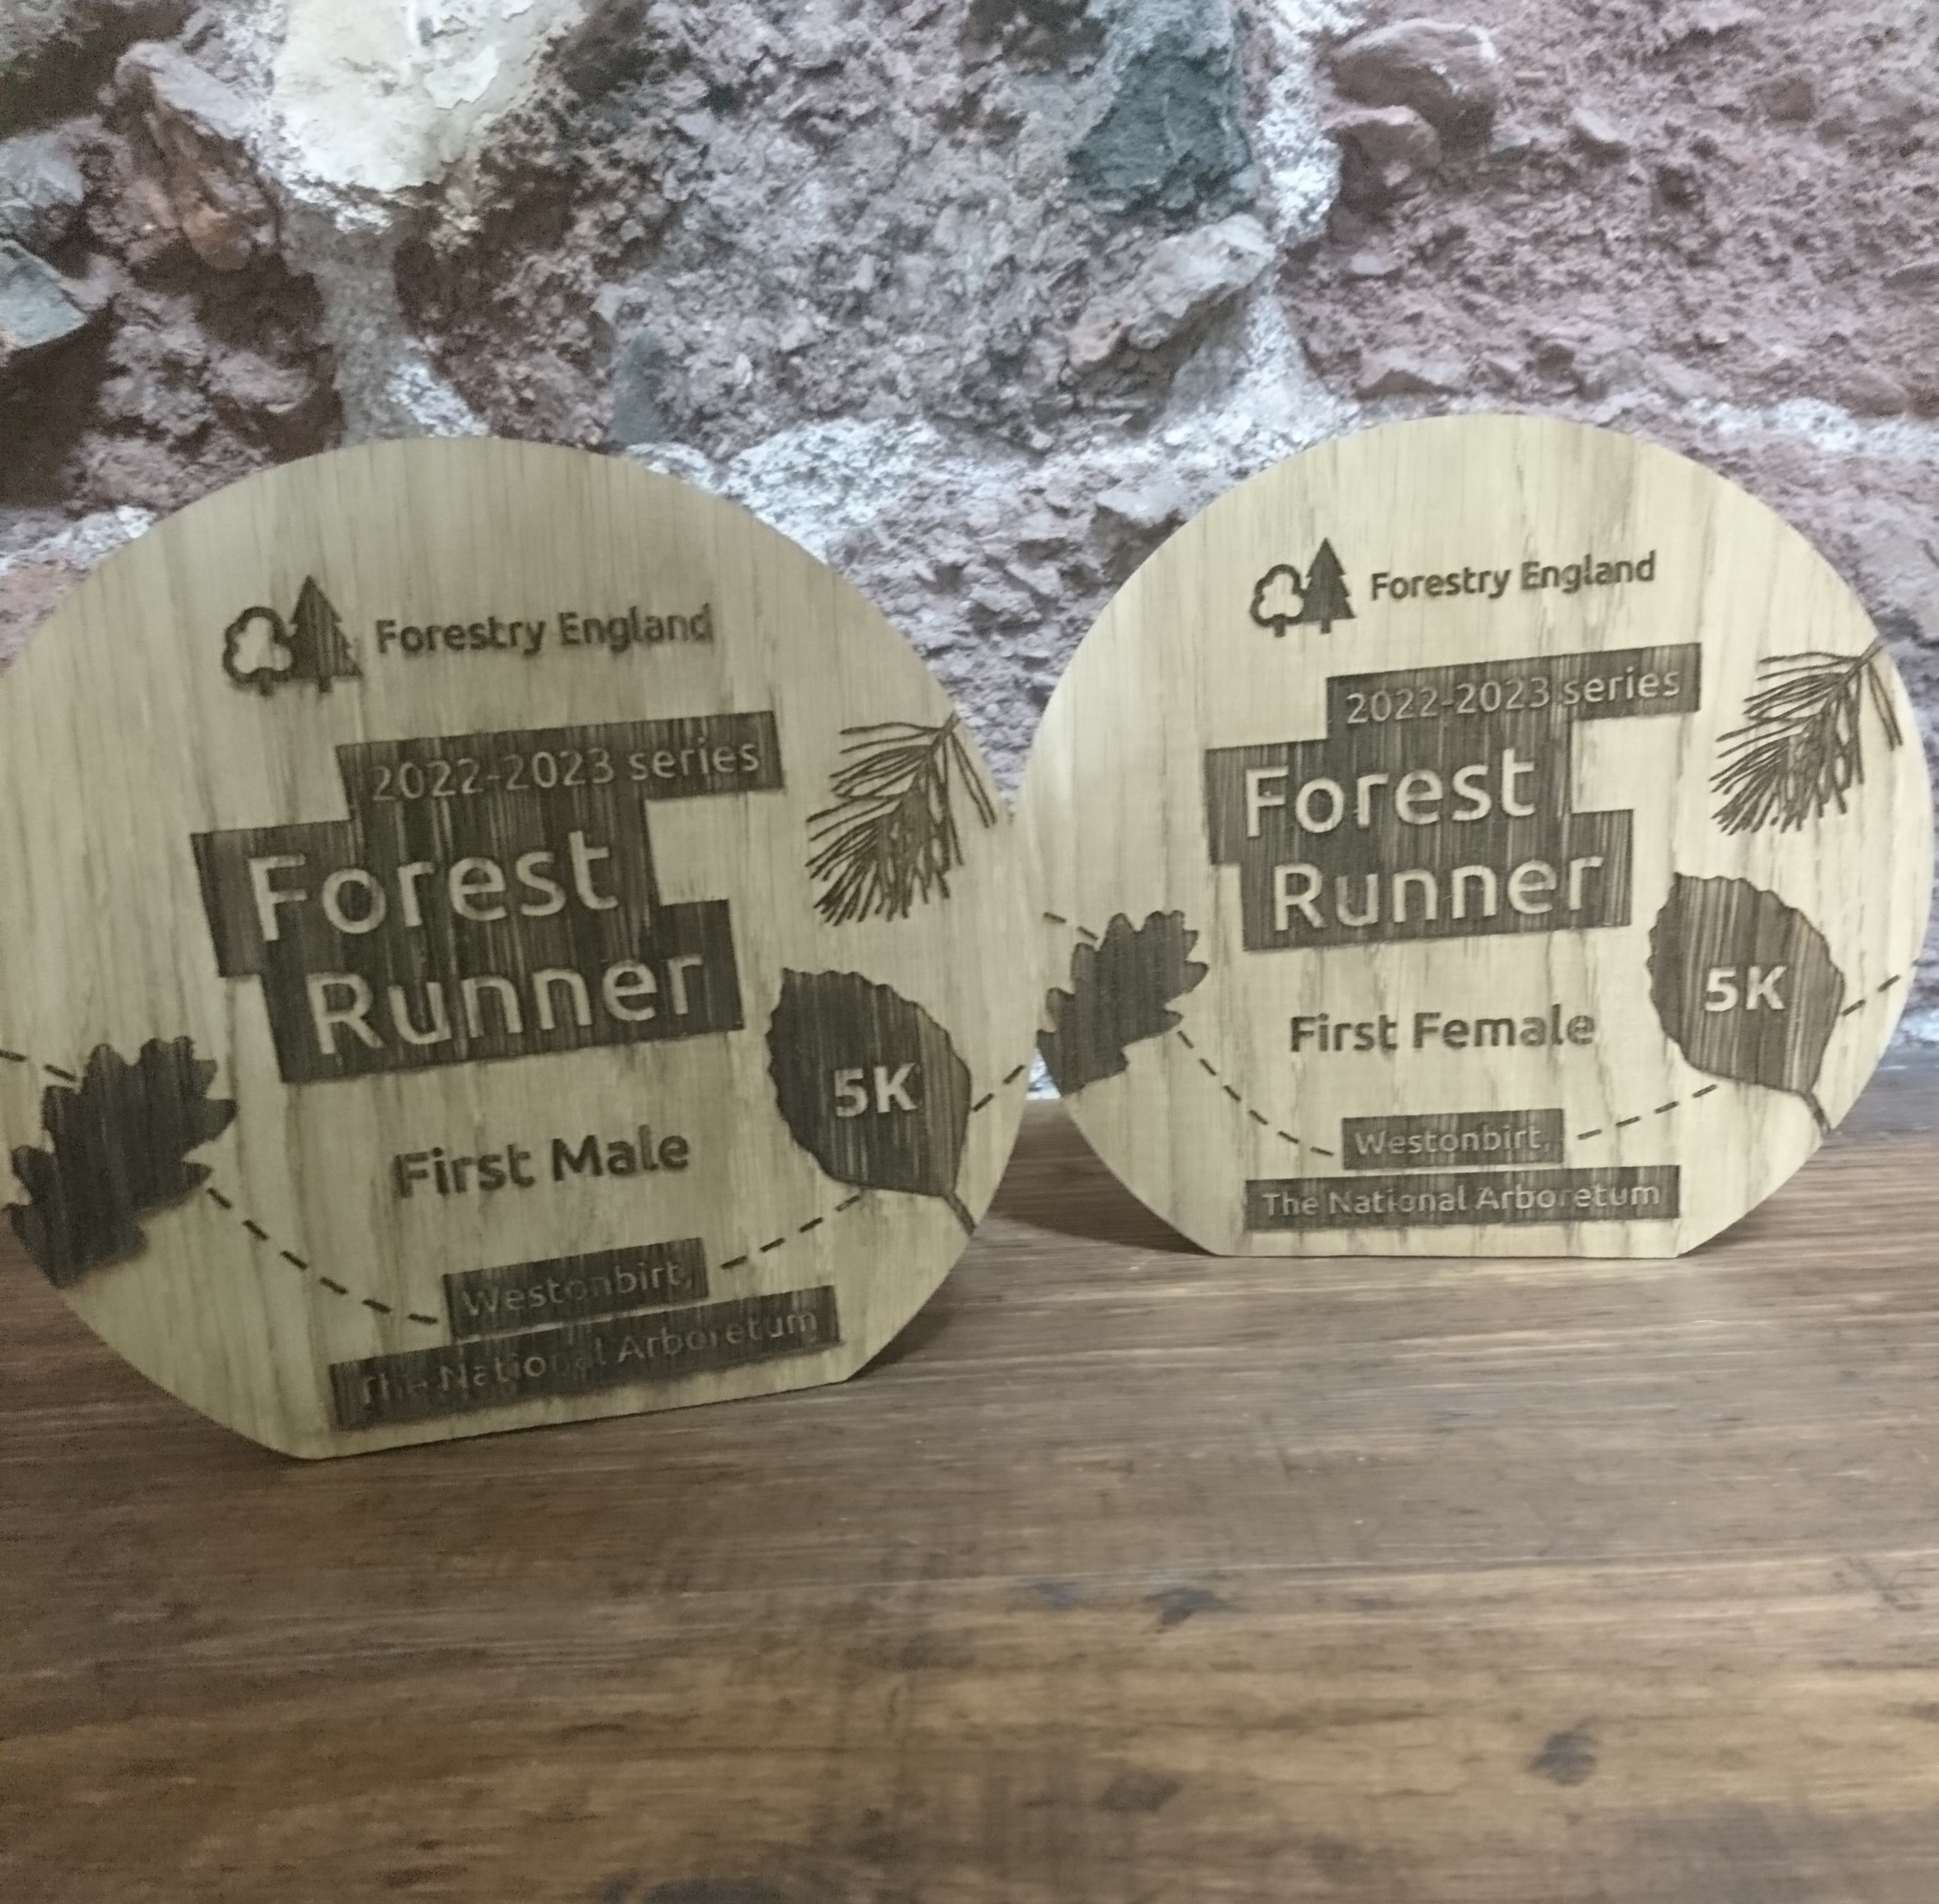 Forestry England Forest Runner trophies in a round shape with flat bottom and engraved with logo and leaf design